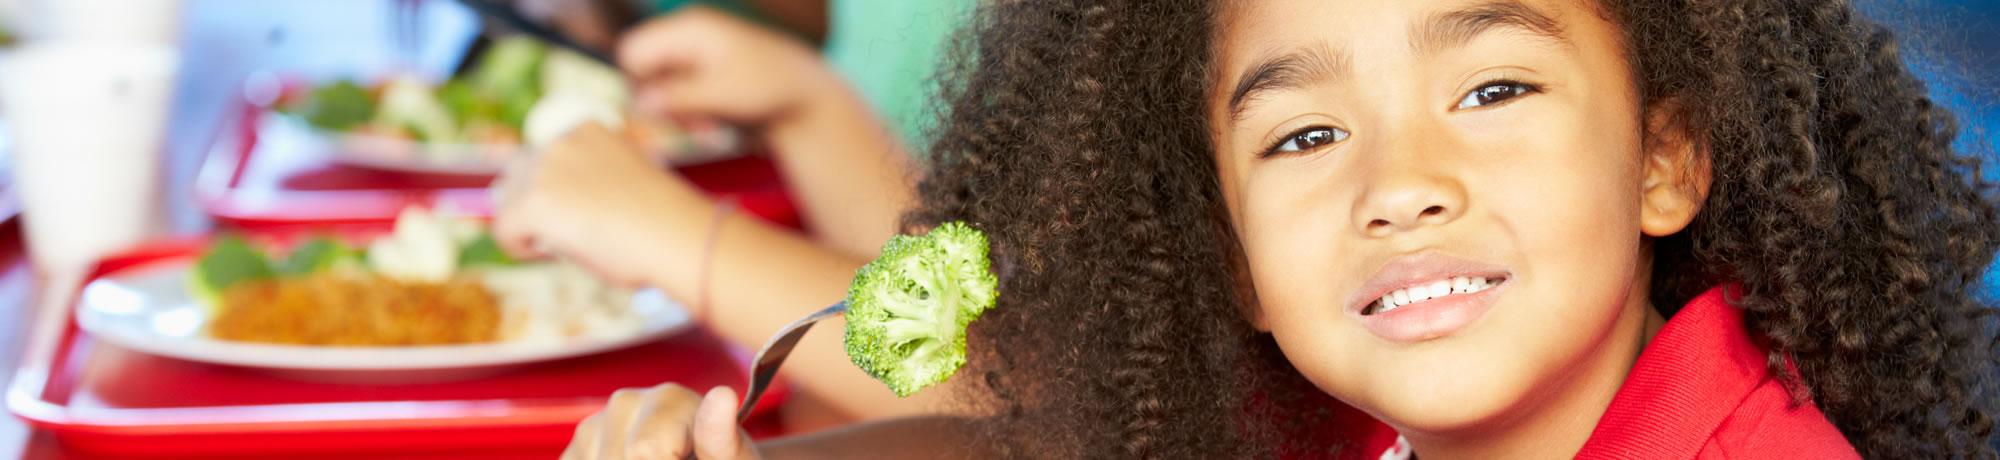 Girl holding broccoli with fork.